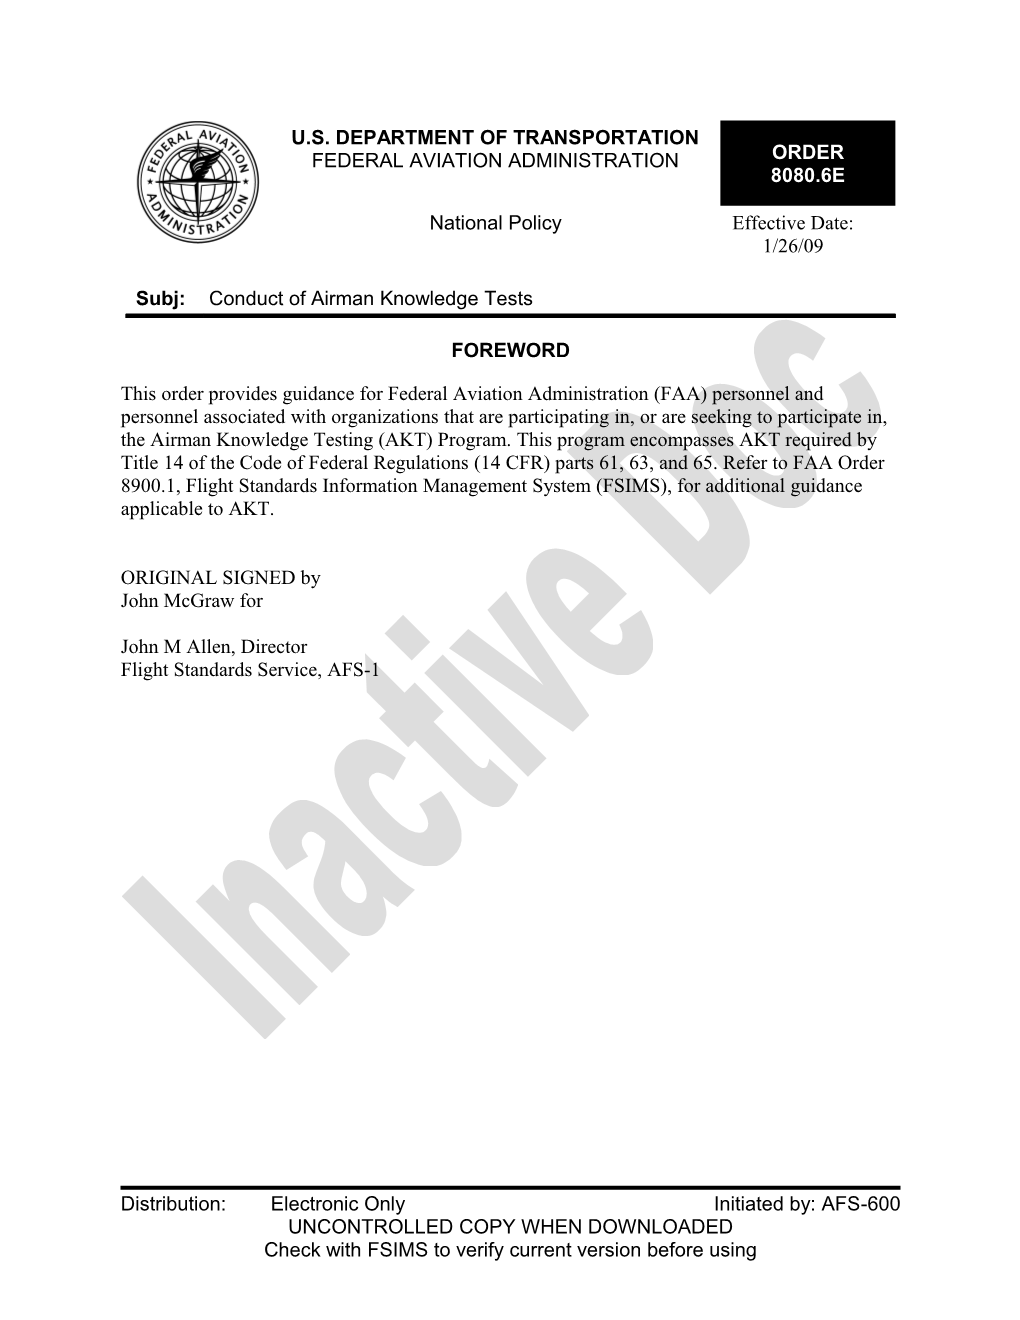 This Order Provides Guidance for Federal Aviation Administration (FAA) Personnel and Personnel